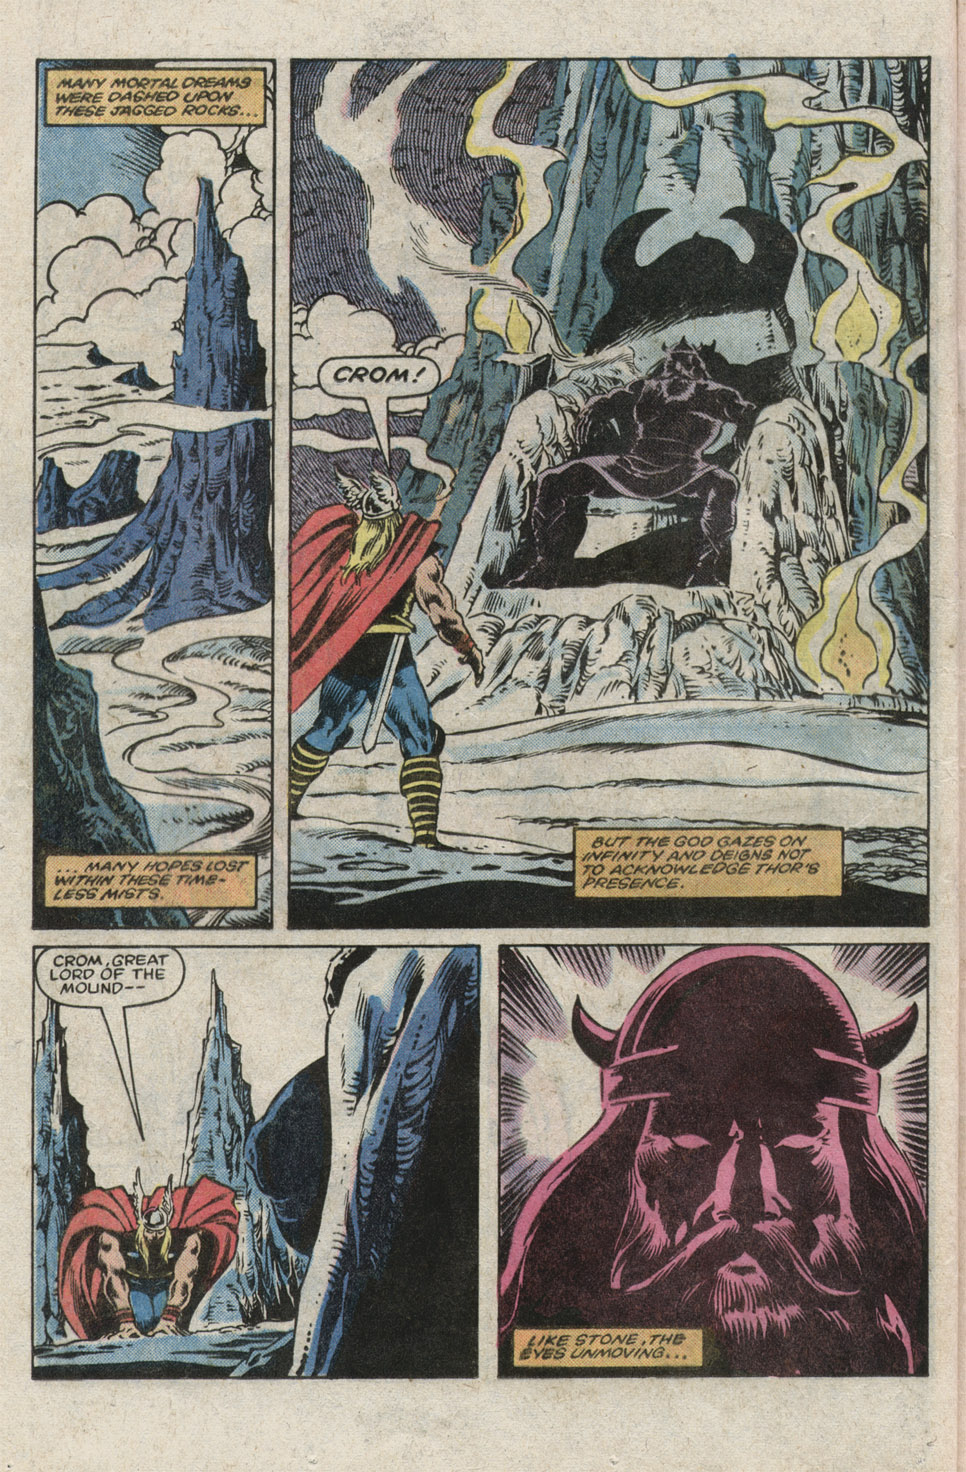 What If? (1977) issue 39 - Thor battled conan - Page 24